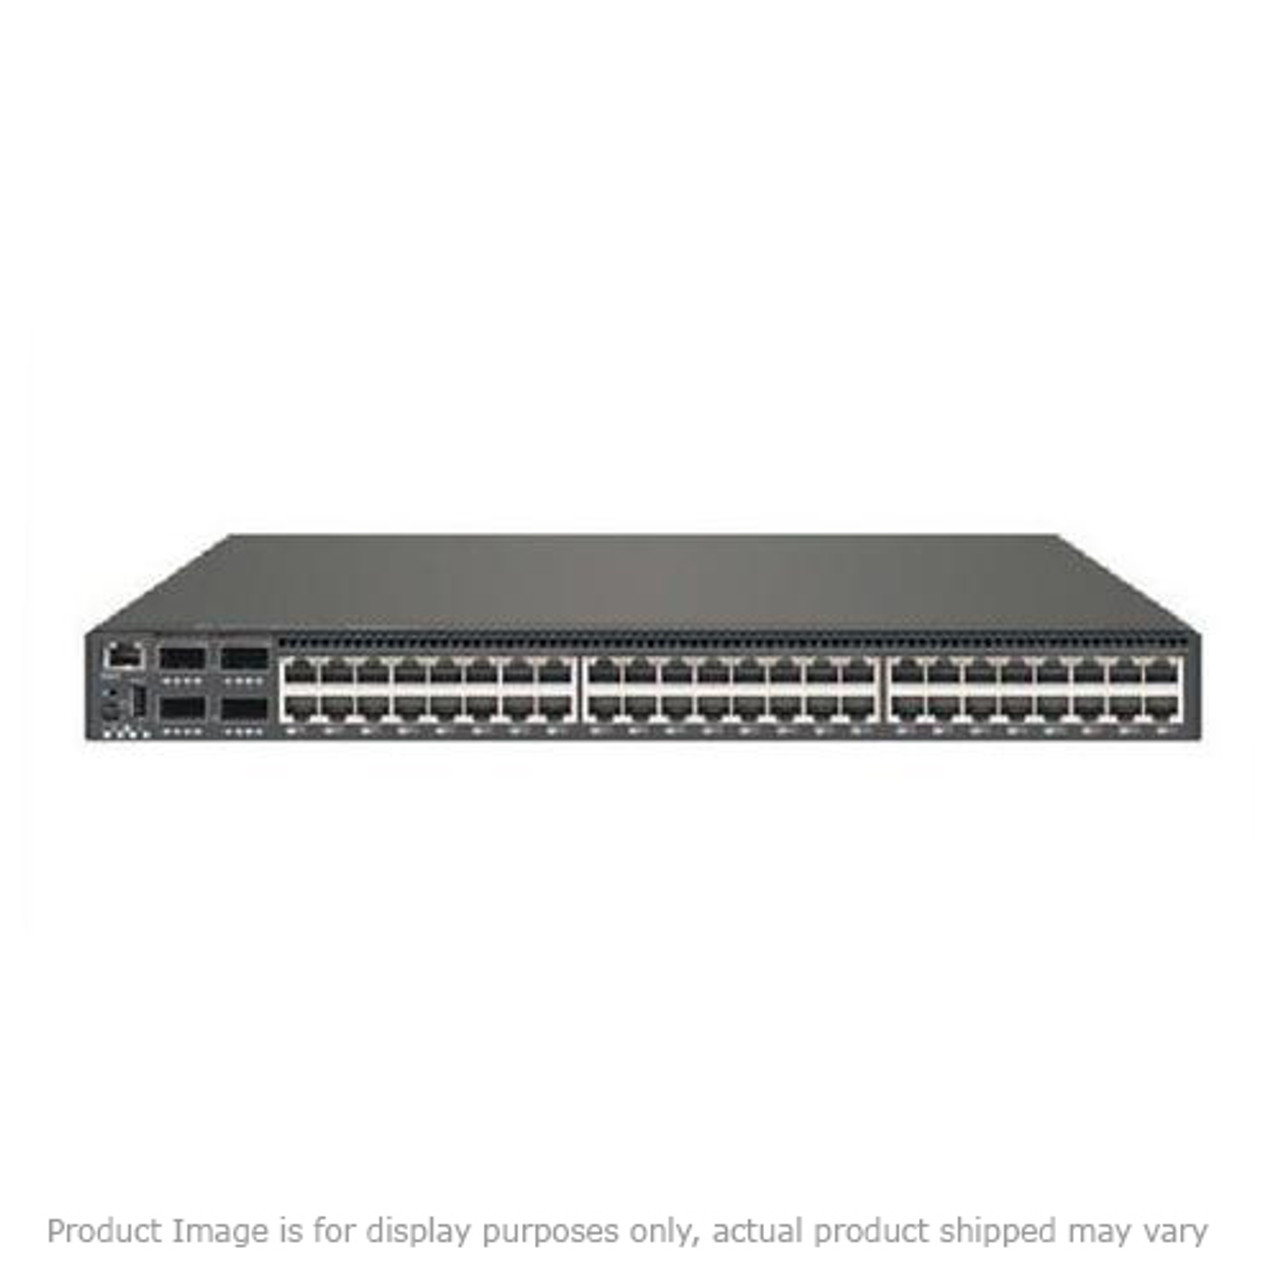 RMAL1912D01 Nortel BayStack 310-24T Switch (24 10BaseT Ports plus 1 10/100BaseTX Port and 2 MDA Slots) with Power Cord (Refurbished)